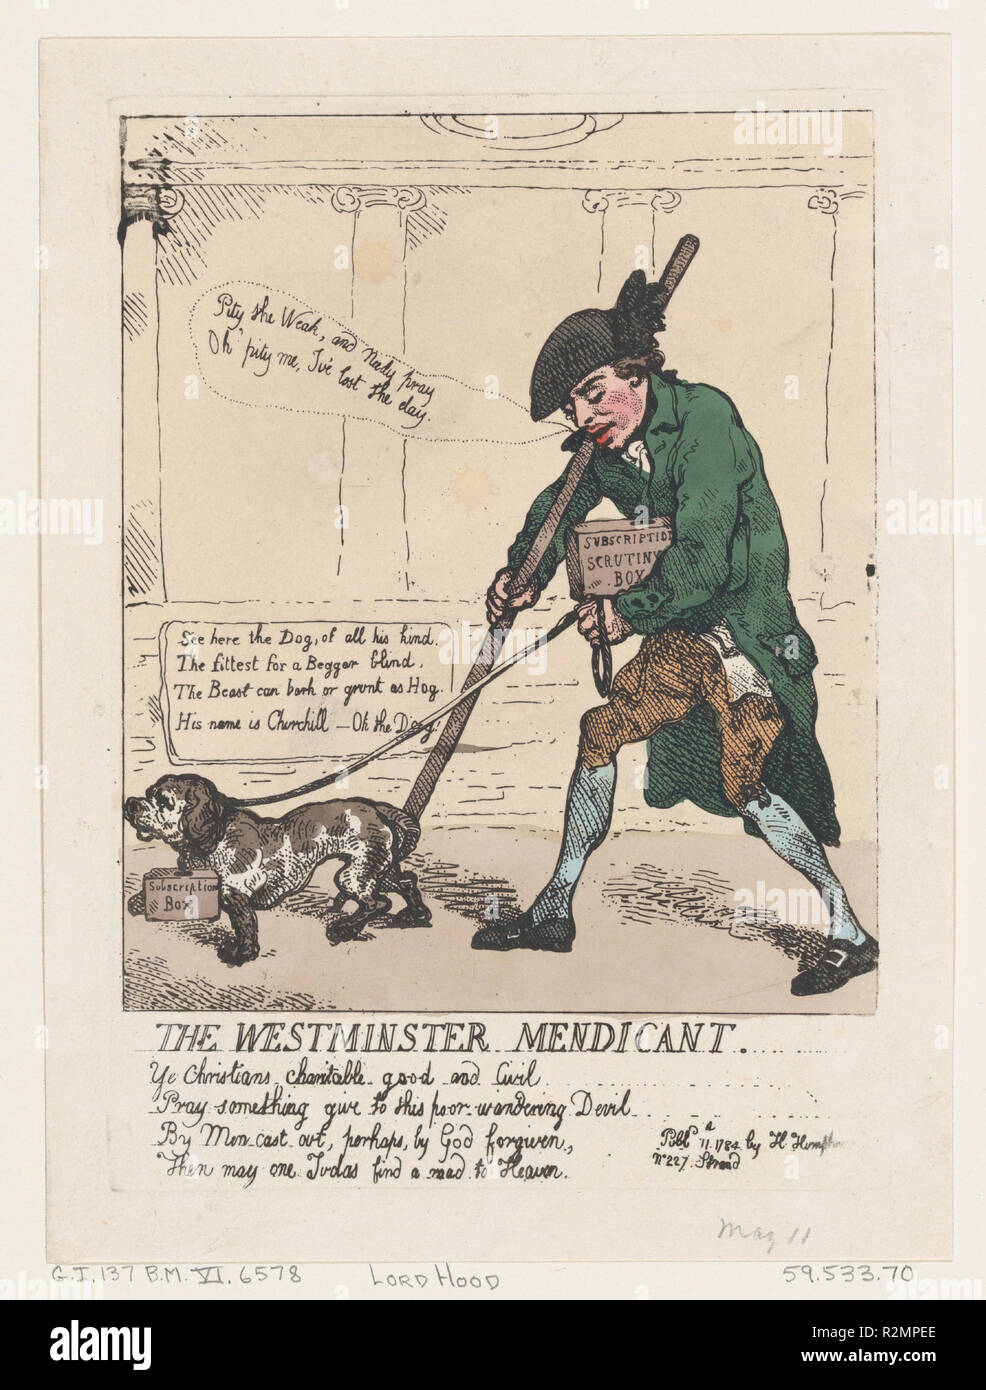 The Westminster Mendicant. Artist: Thomas Rowlandson (British, London 1757-1827 London). Dimensions: Sheet: 9 1/4 × 6 7/8 in. (23.5 × 17.4 cm)  Plate: 8 5/16 × 5 7/8 in. (21.1 × 14.9 cm). Published in: London. Publisher: Hannah Humphrey (London). Subject: Sir Cecil Wray (British, Yorkshire 1734-1805 Lincolnshire). Date: May 11, 1784. Museum: Metropolitan Museum of Art, New York, USA. Stock Photo